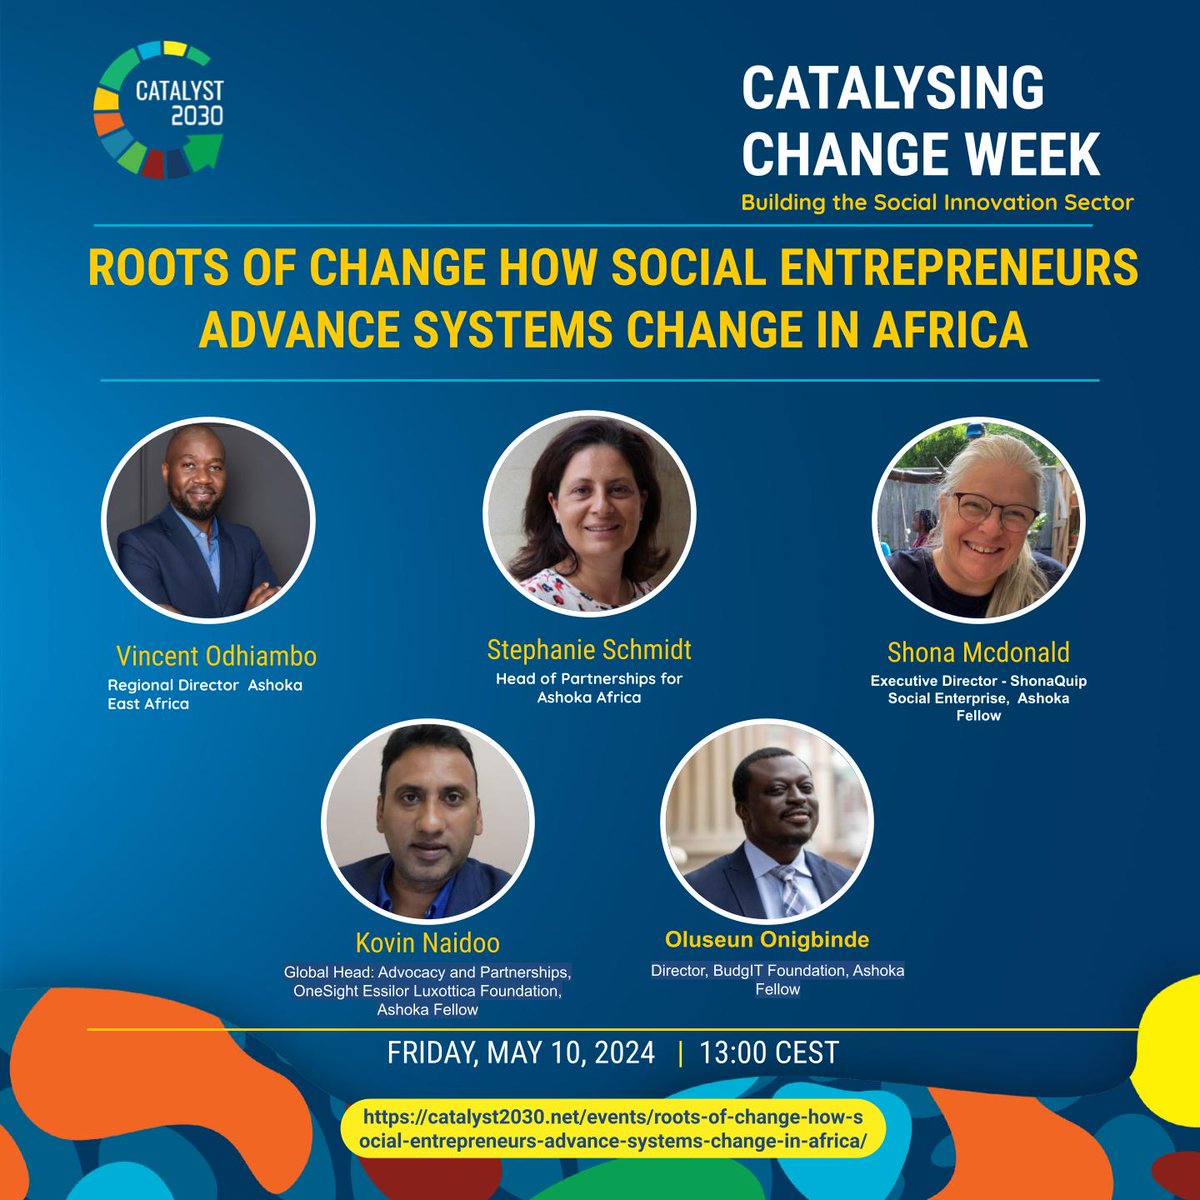 So glad to be moderating this session at #Catalyst2030Week2024 on #SystemsChange with @Catalyst_2030 and @AshokaAfrica. Want to join? Register here: lnkd.in/dqVmsGYi

#RootsOfChange #SocialEntrepreneurship #SocialInnovation #SDGs #Catalyst2030 #Catalyst2030Week2024